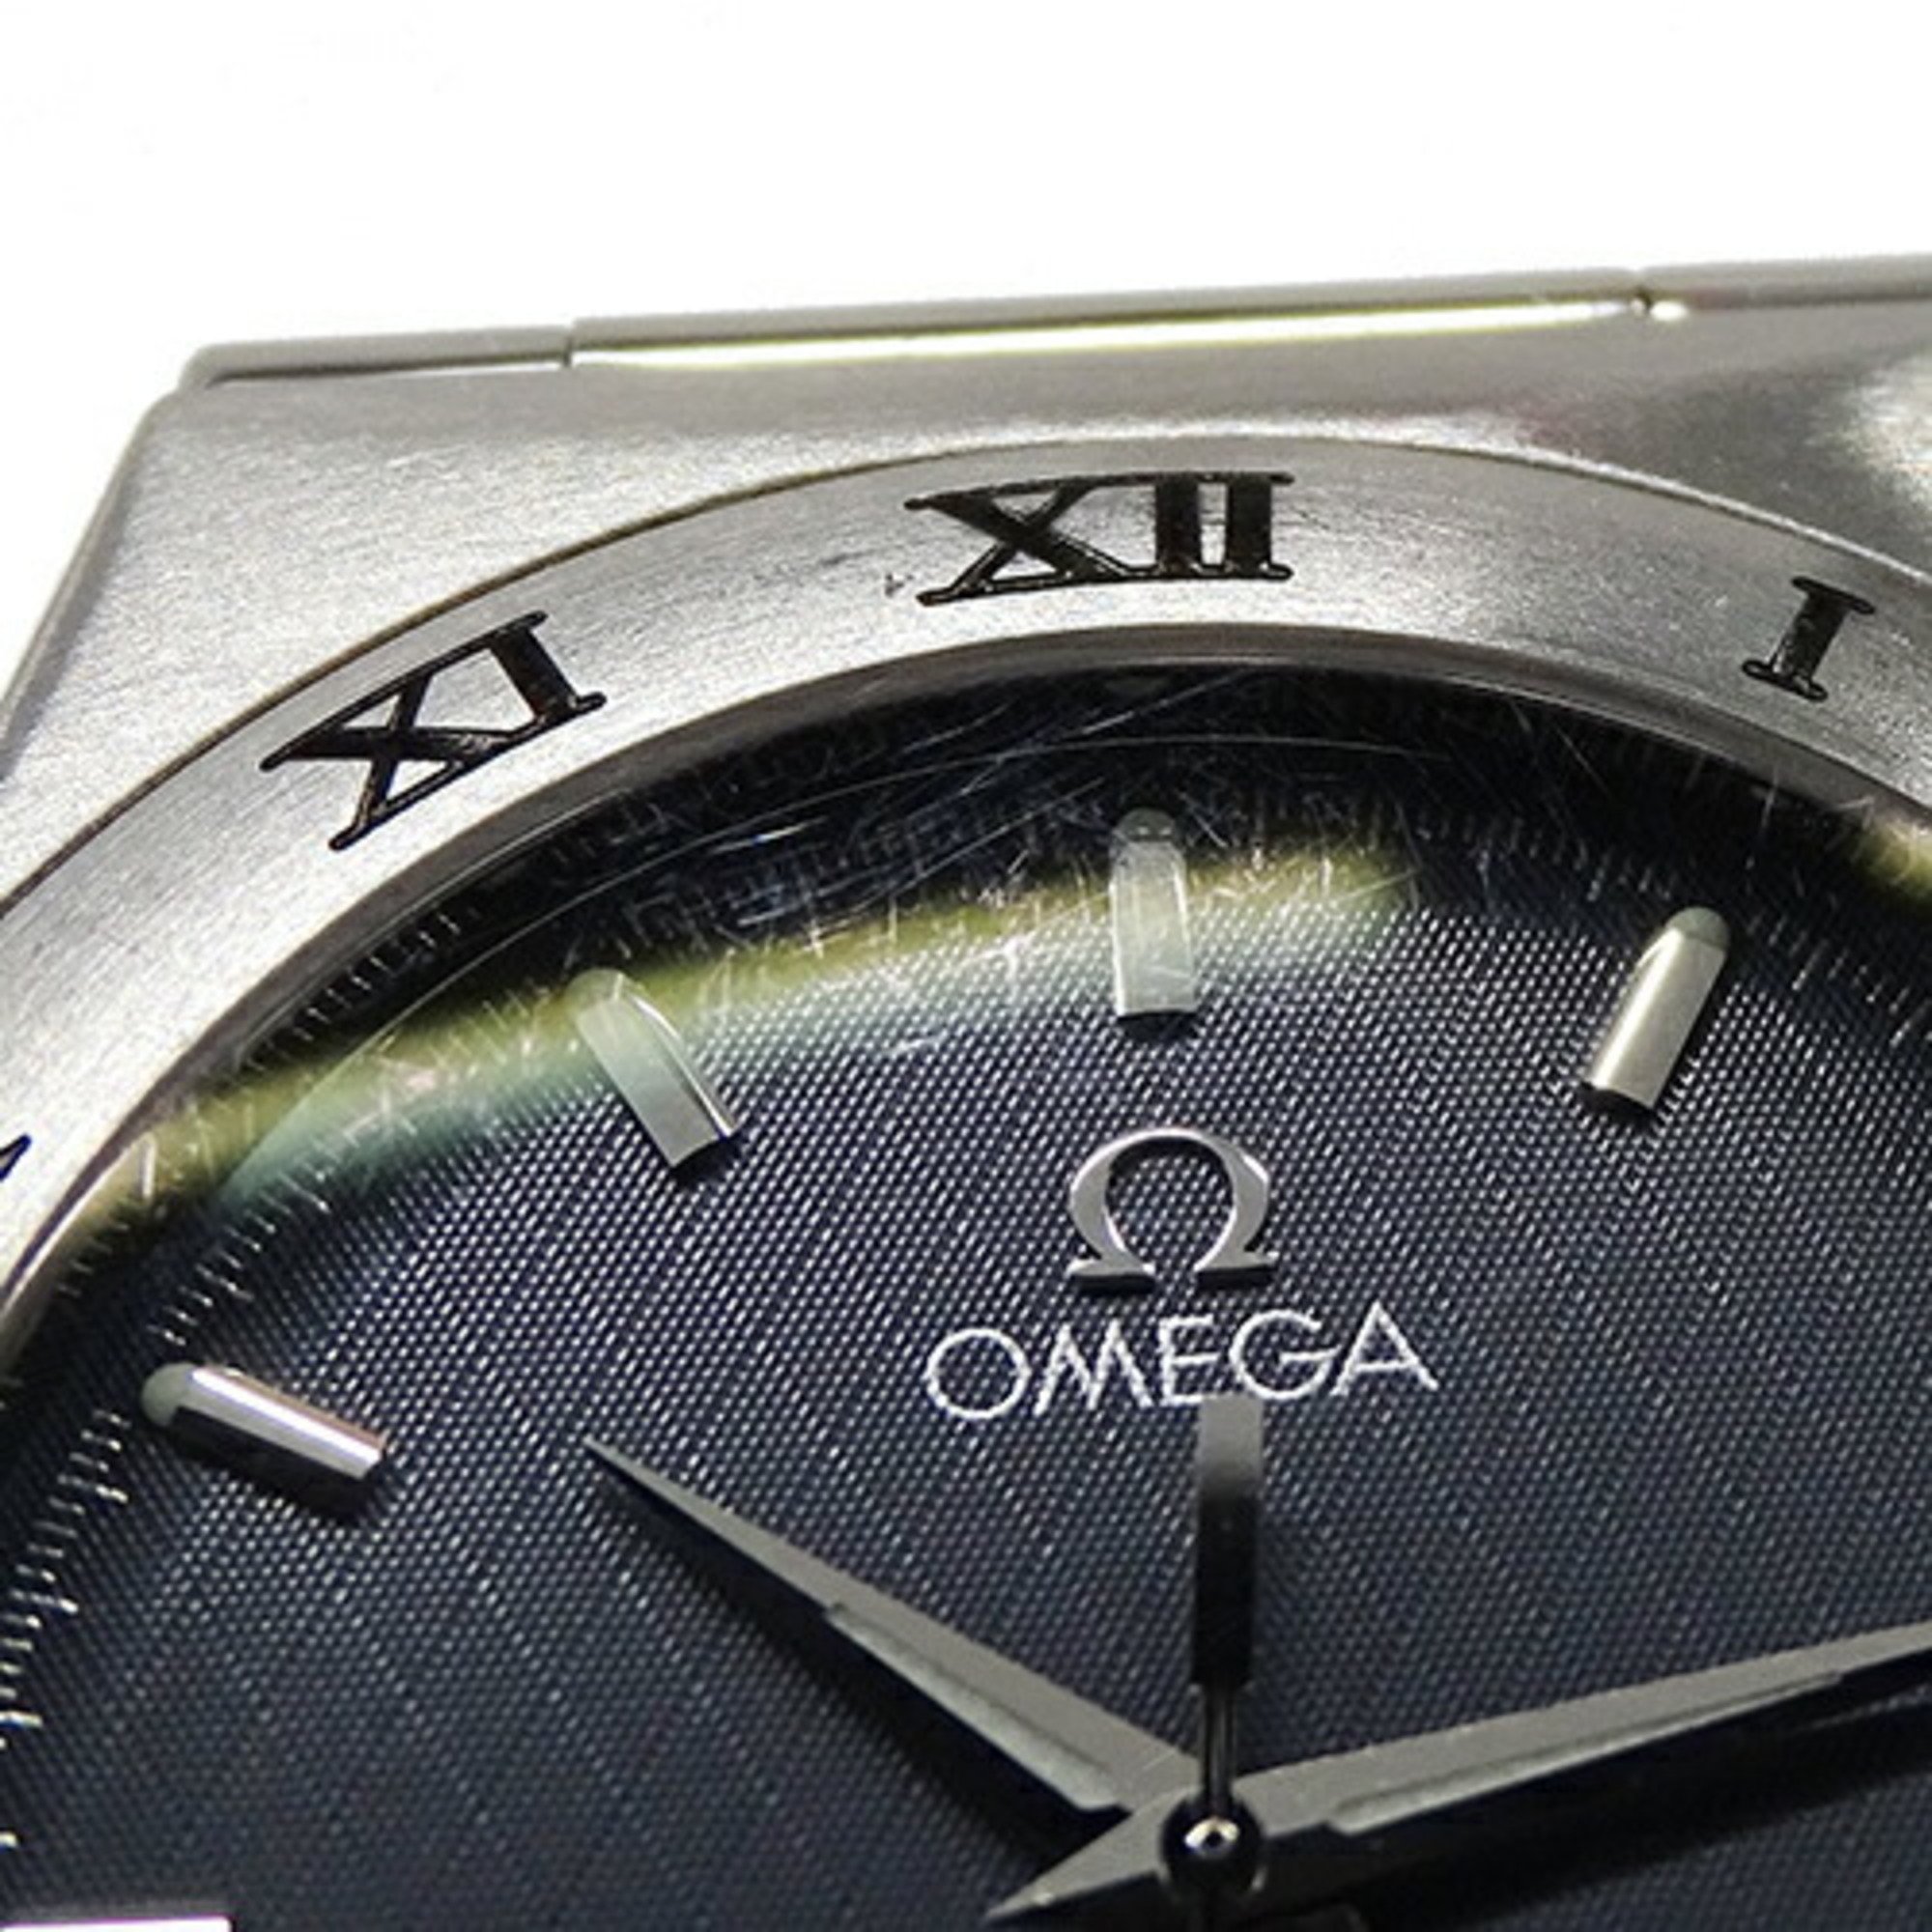 Omega OMEGA Constellation 1512.40 Watch Men's Date Quartz Stainless Steel SS Silver Gray Polished